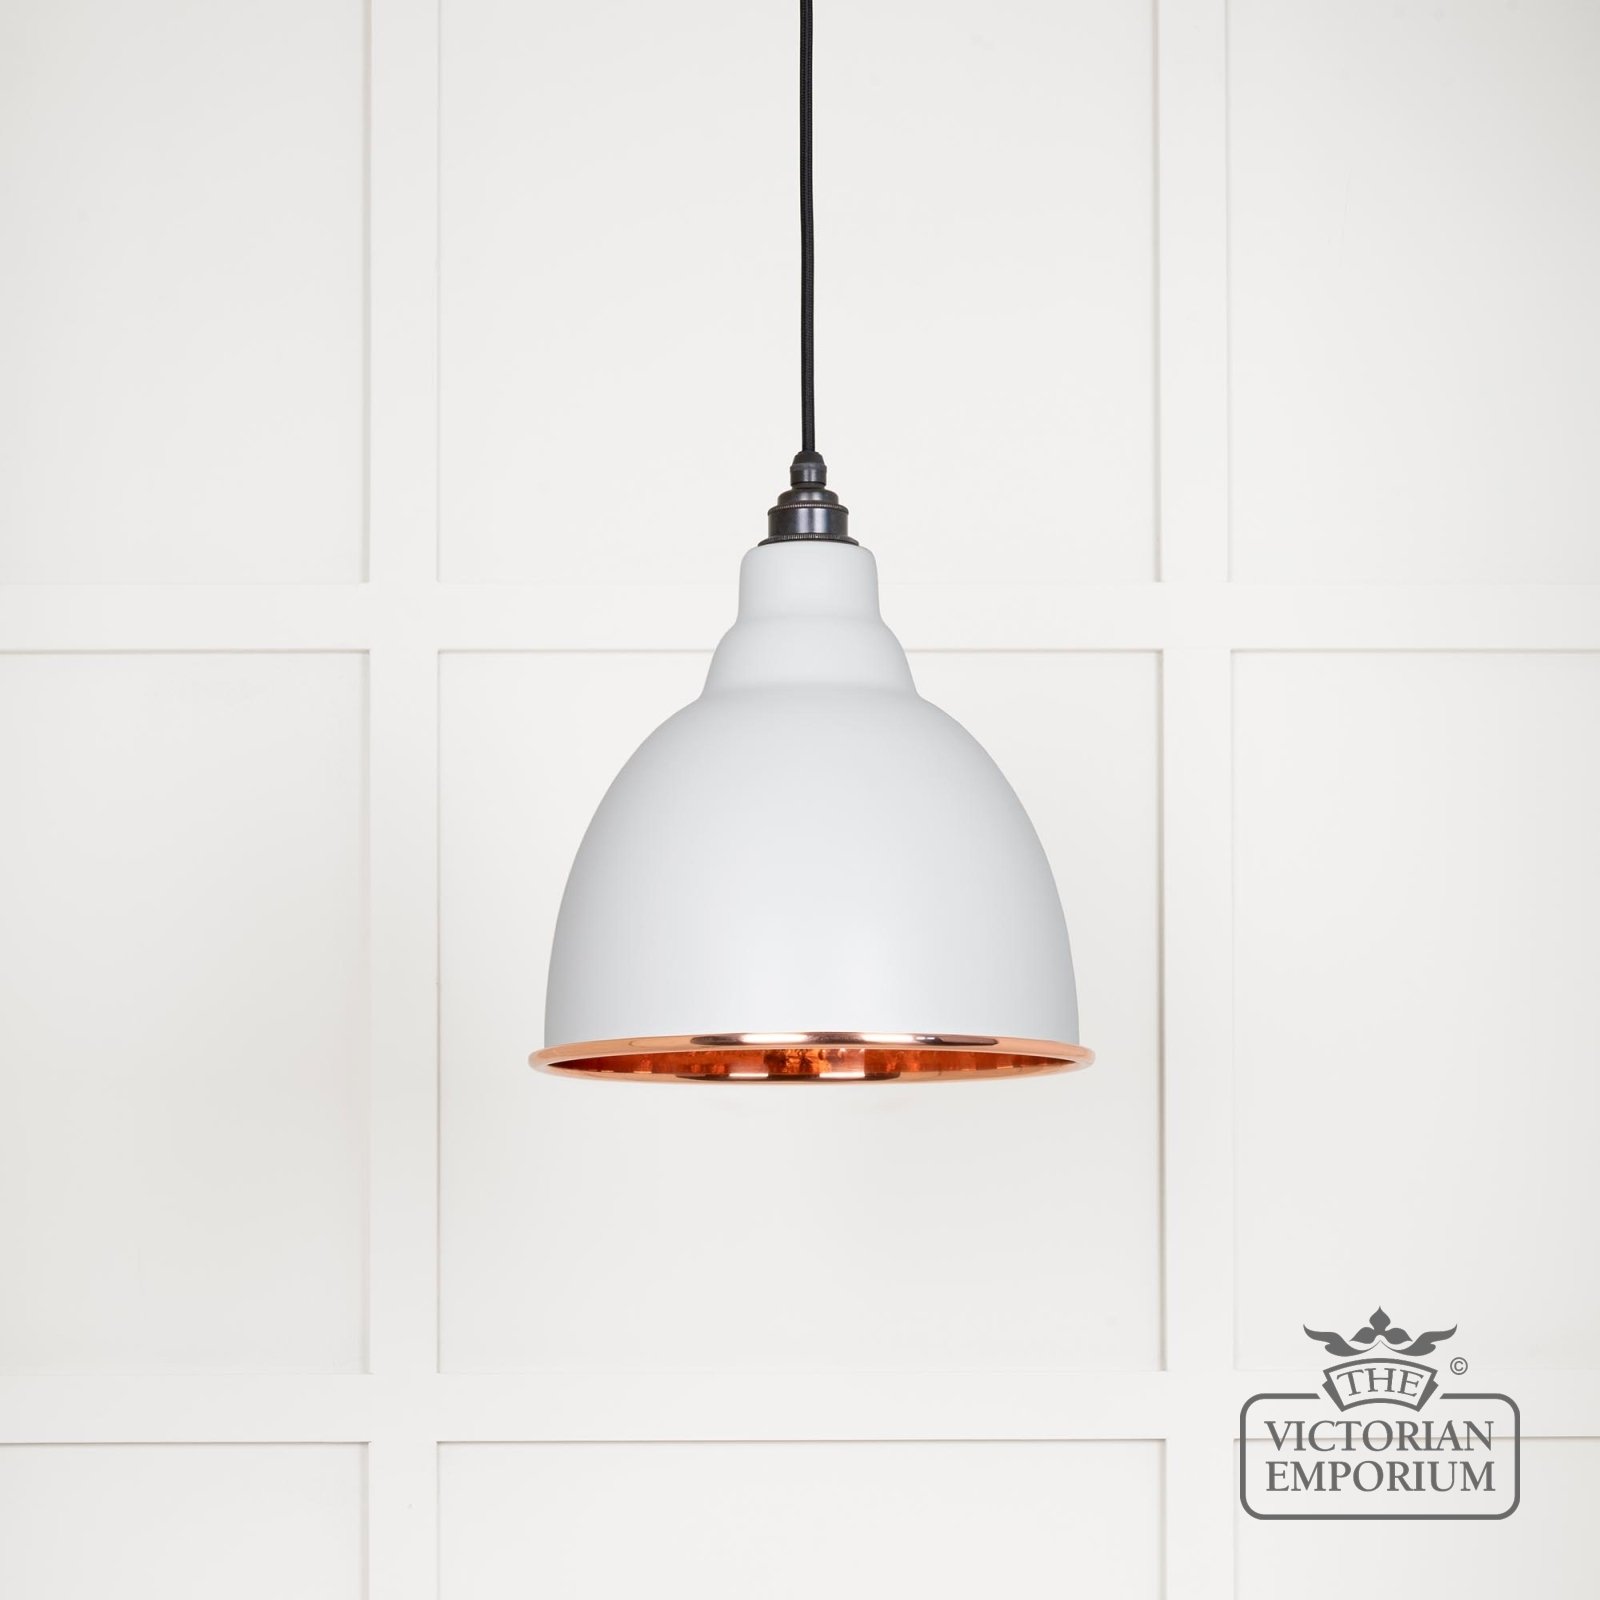 Brindle Pendant Light in Flock with Hammered Copper Interior